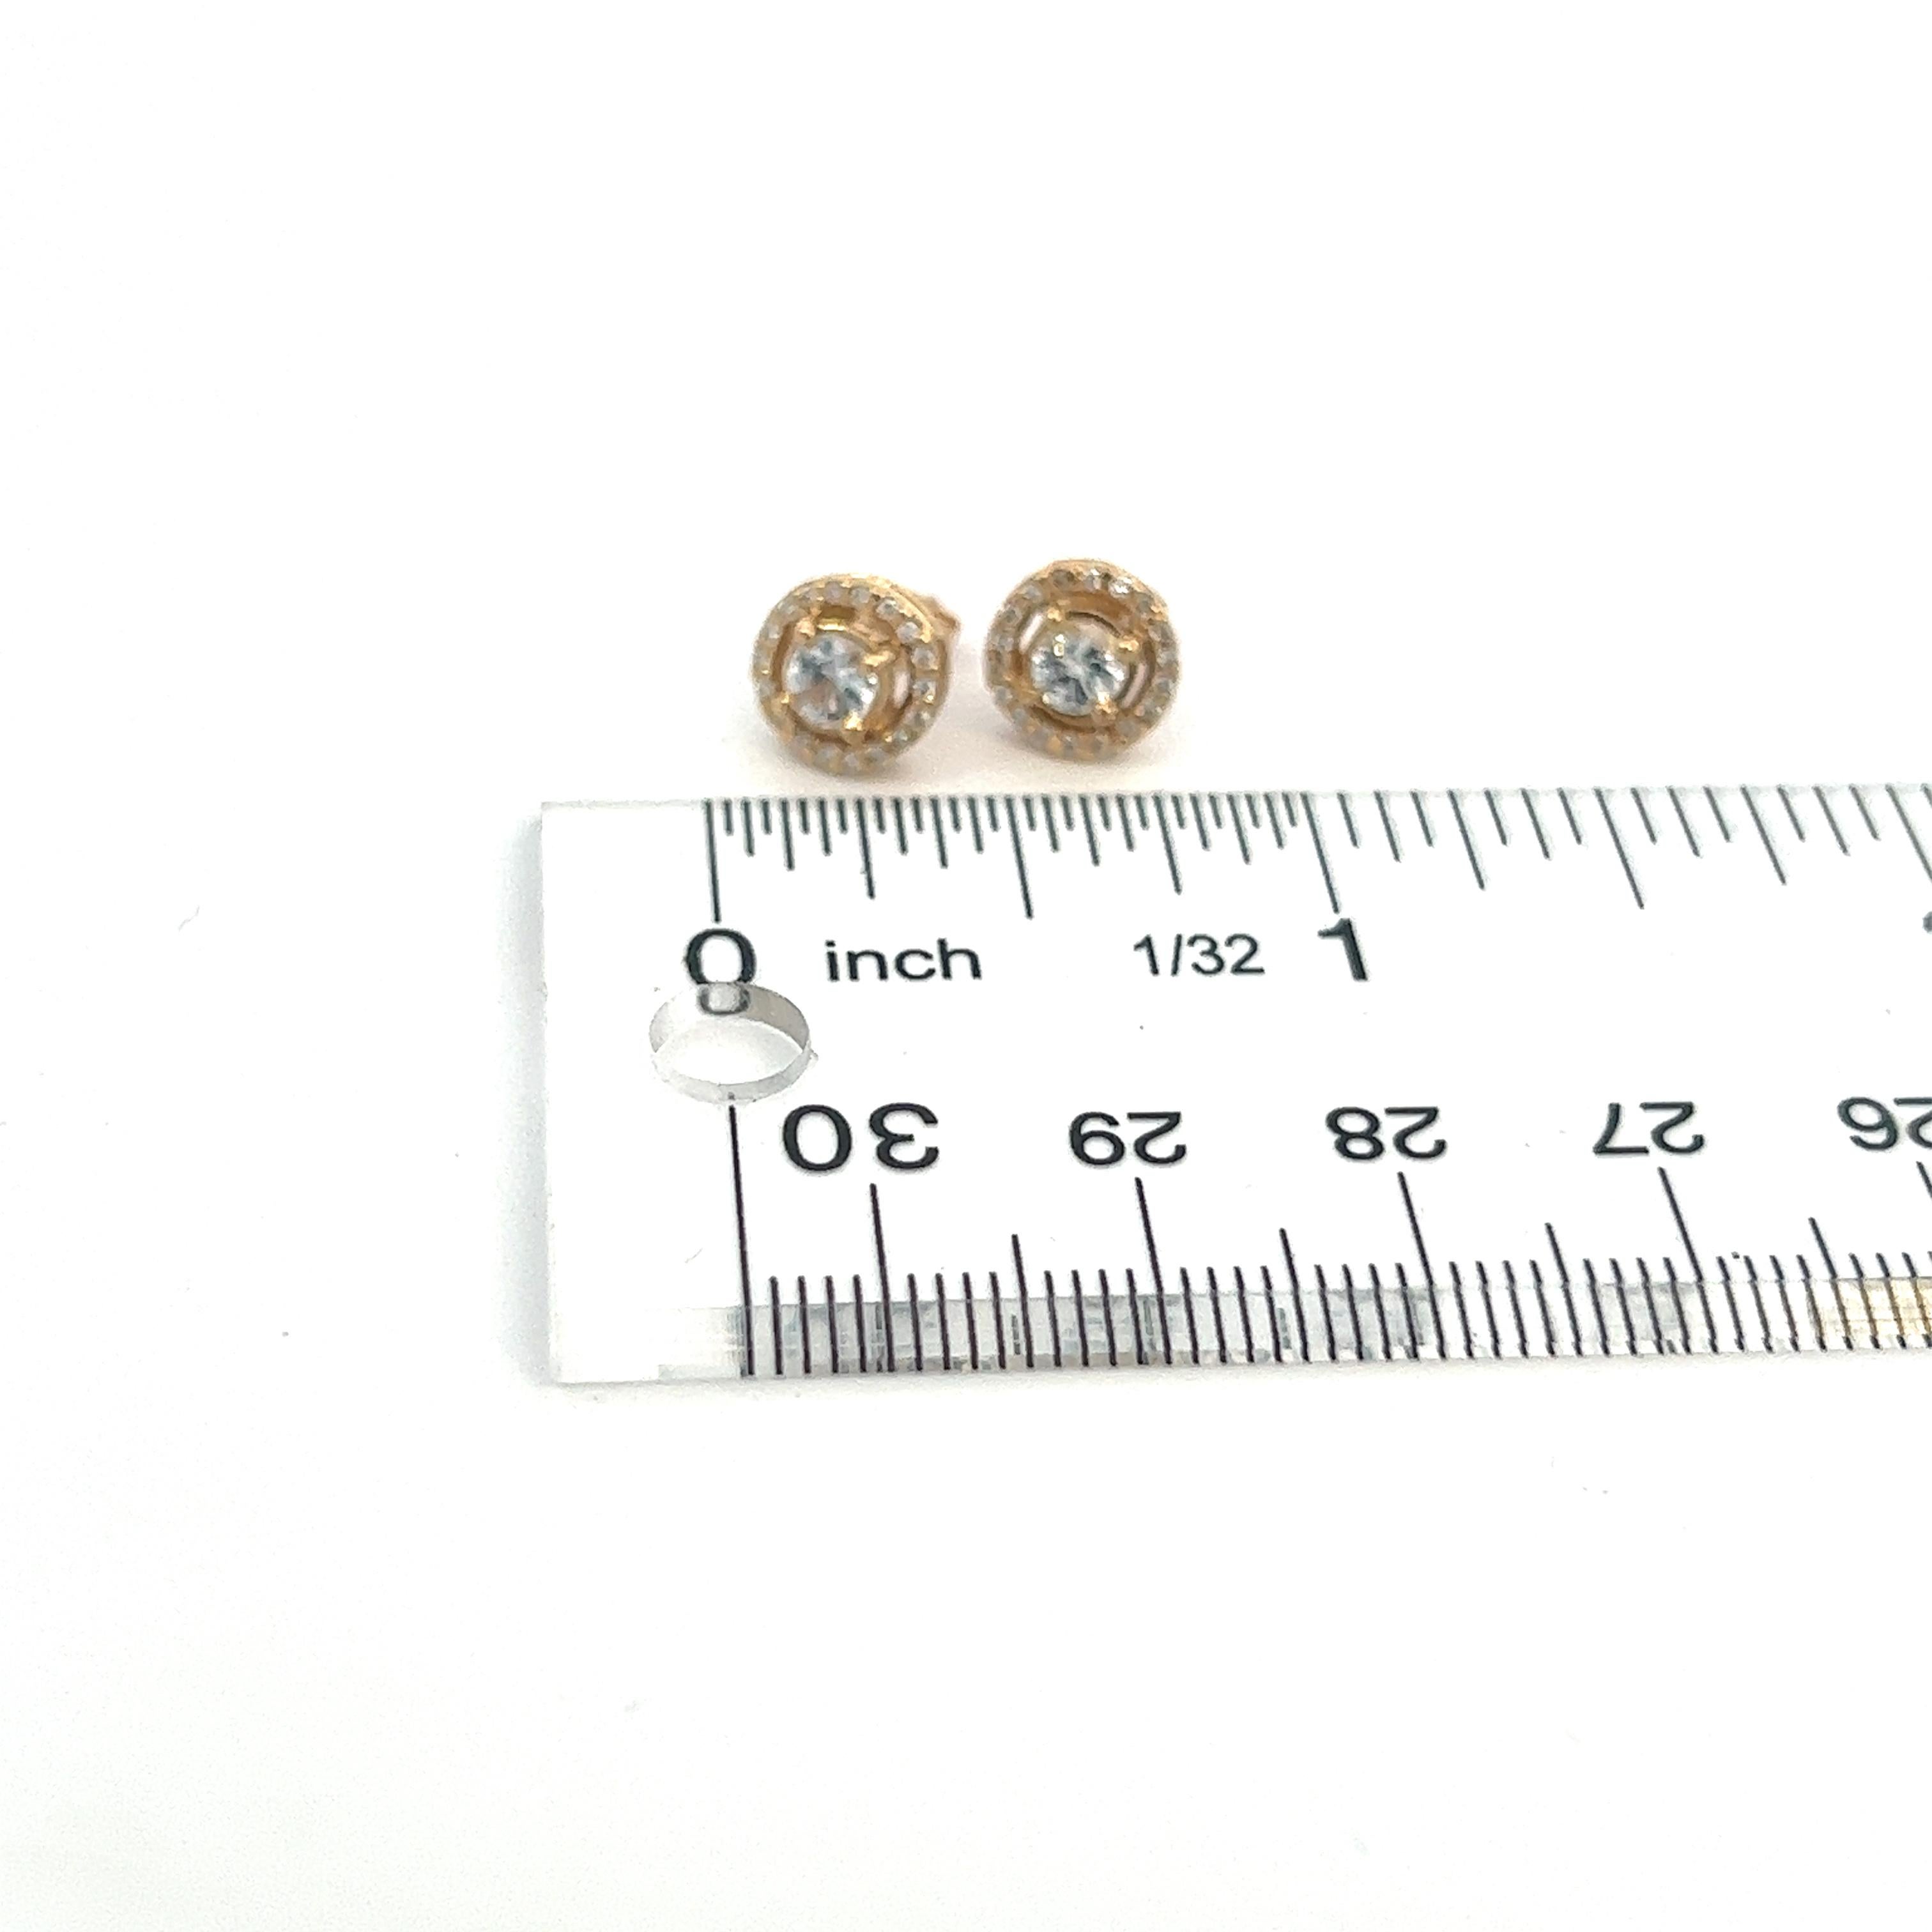 Natural White Sapphire Diamond Stud Earrings 14k Yellow Gold 0.97 TCW Certified For Sale 4